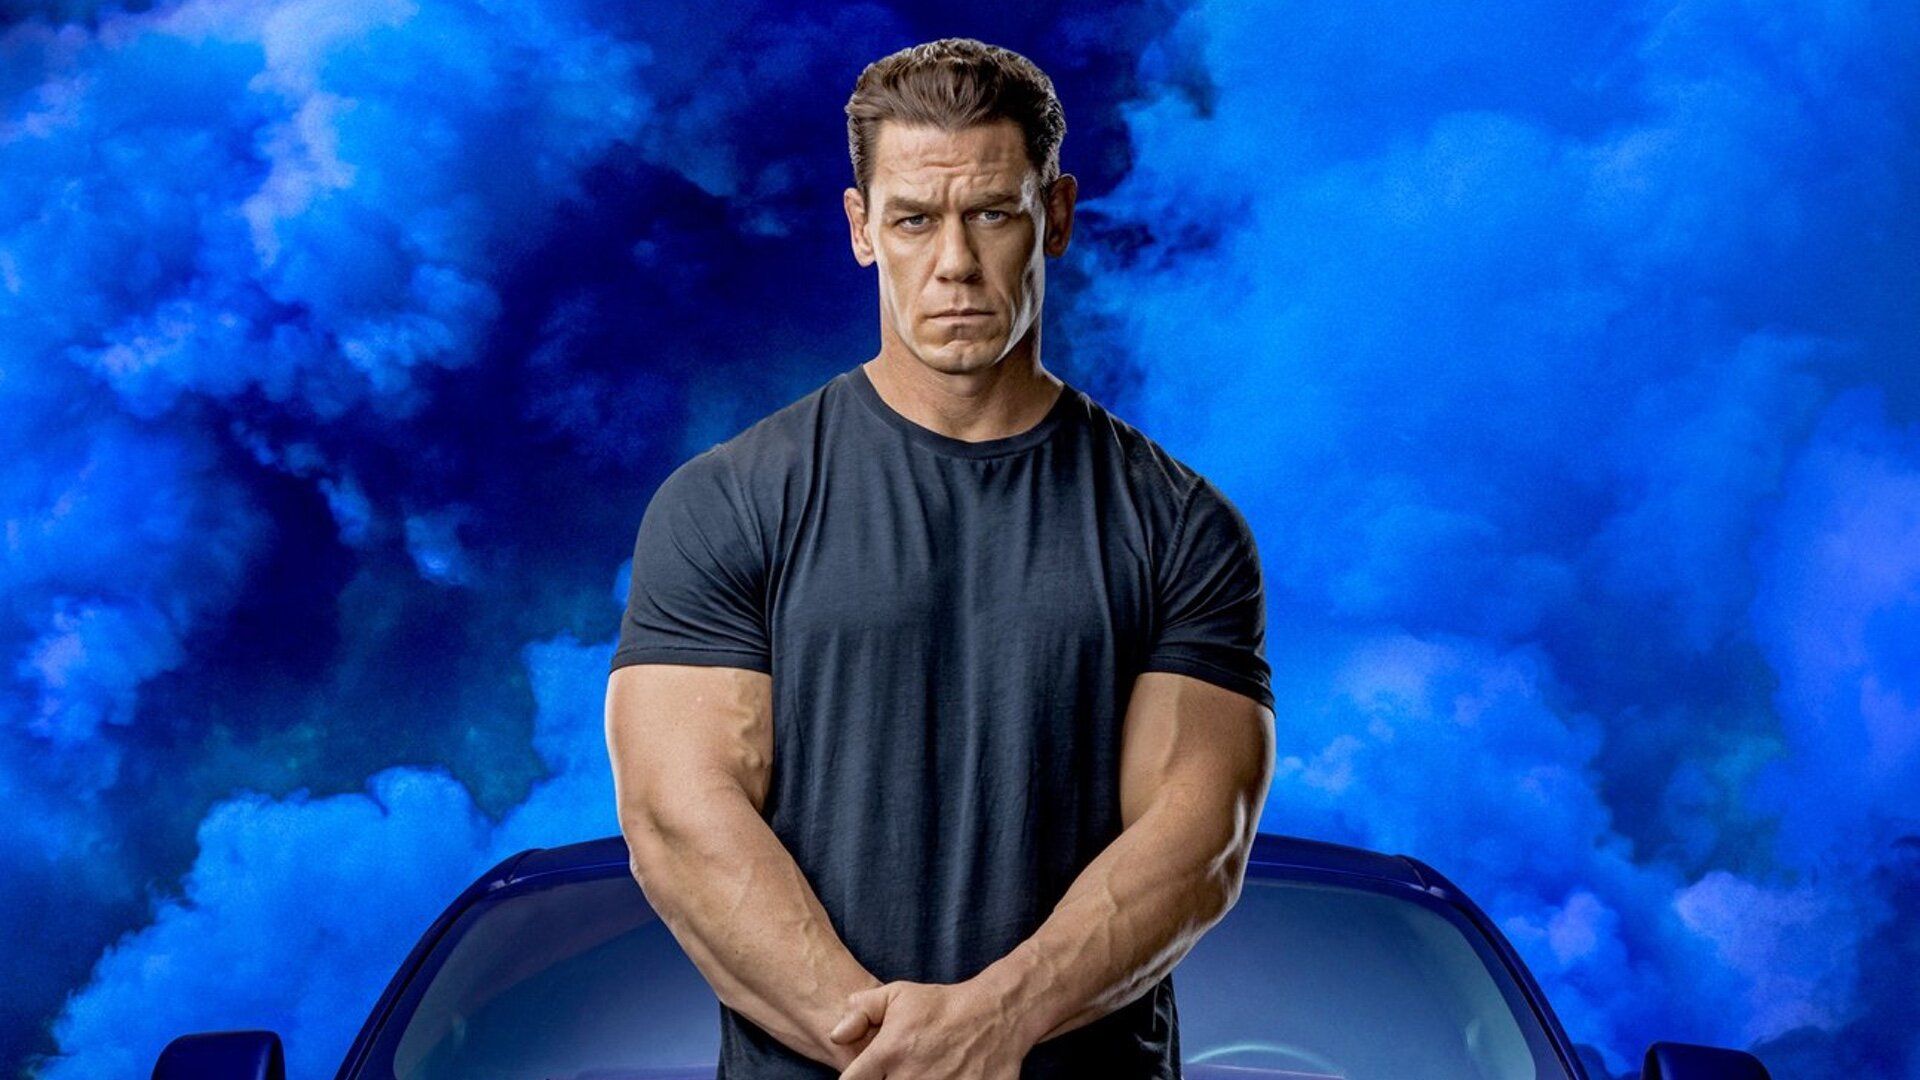 New Character Posters Released For FAST 9 and One Gives us Our First Look at John Cena